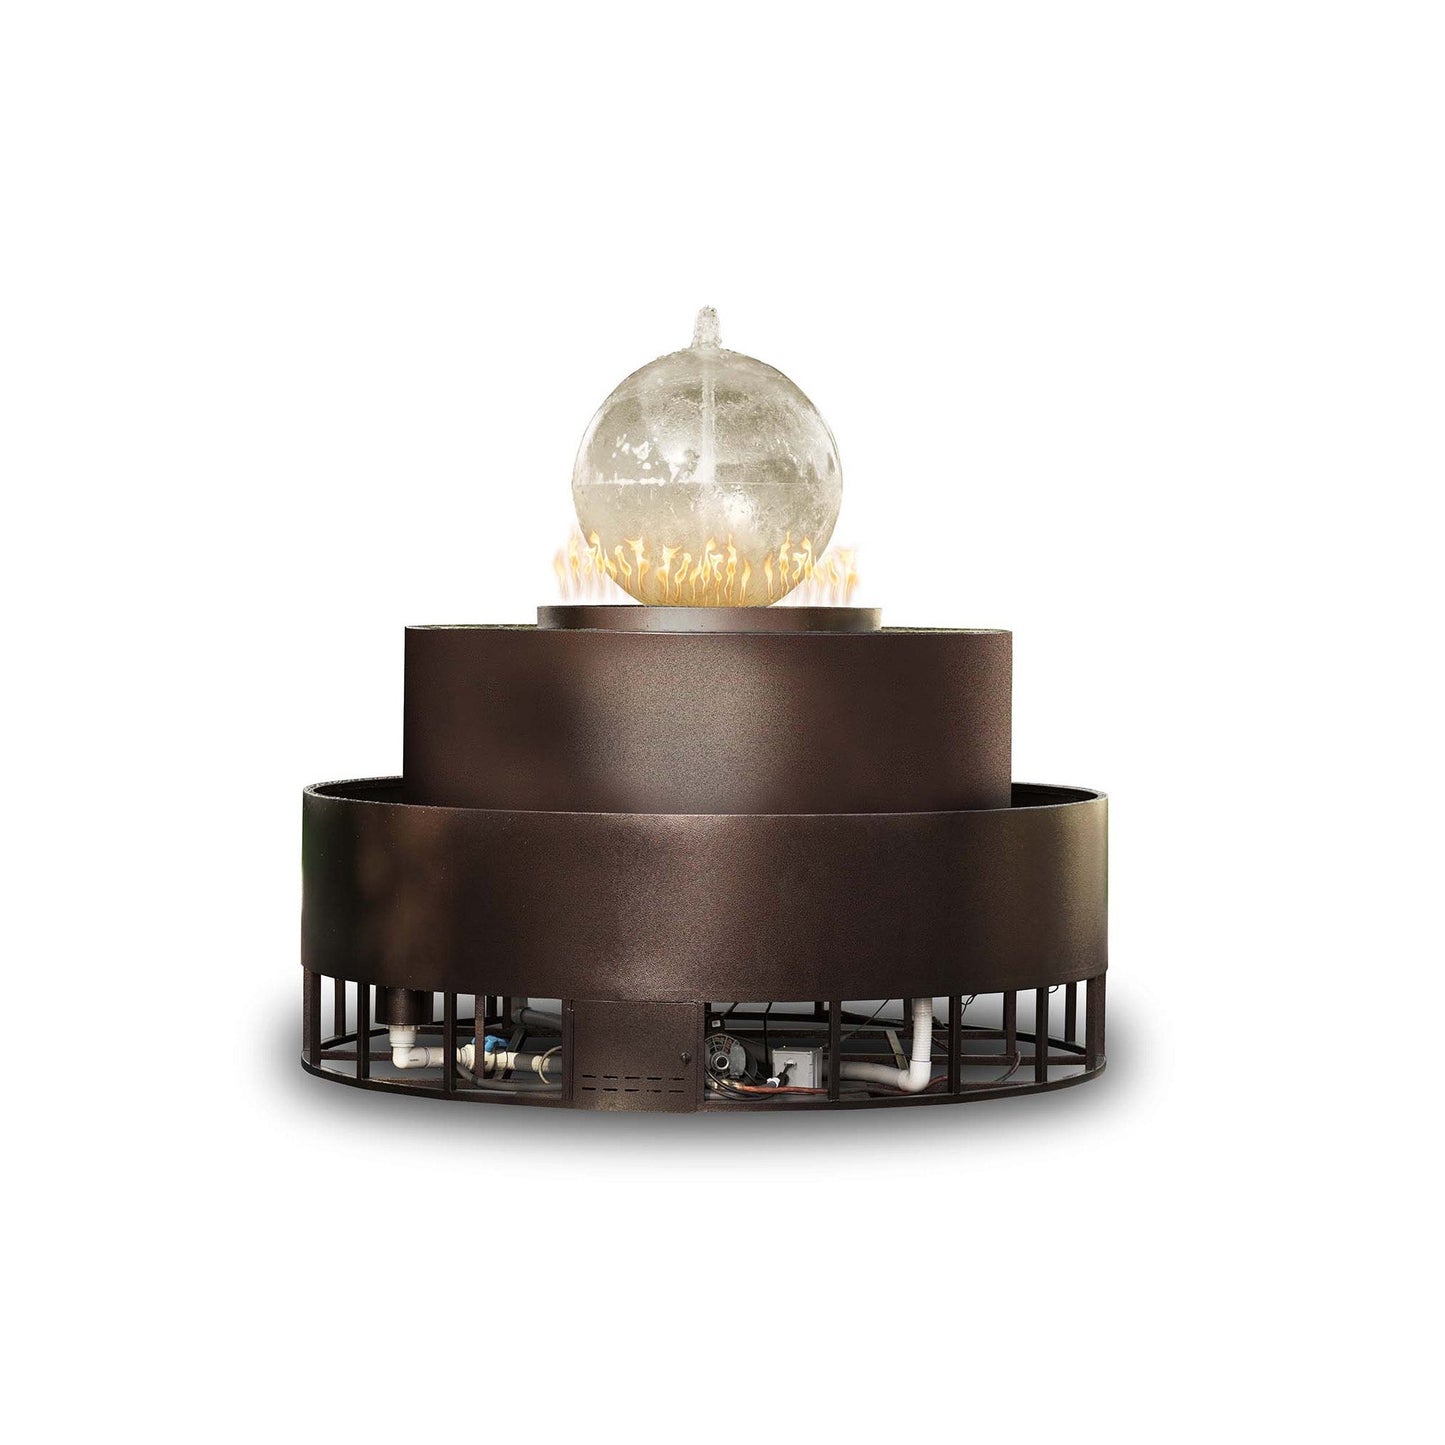 The Outdoor Plus Round Atlas 89" Silver Vein Powder Coated Natural Gas Fire & Water Fountain with 12V Electronic Ignition